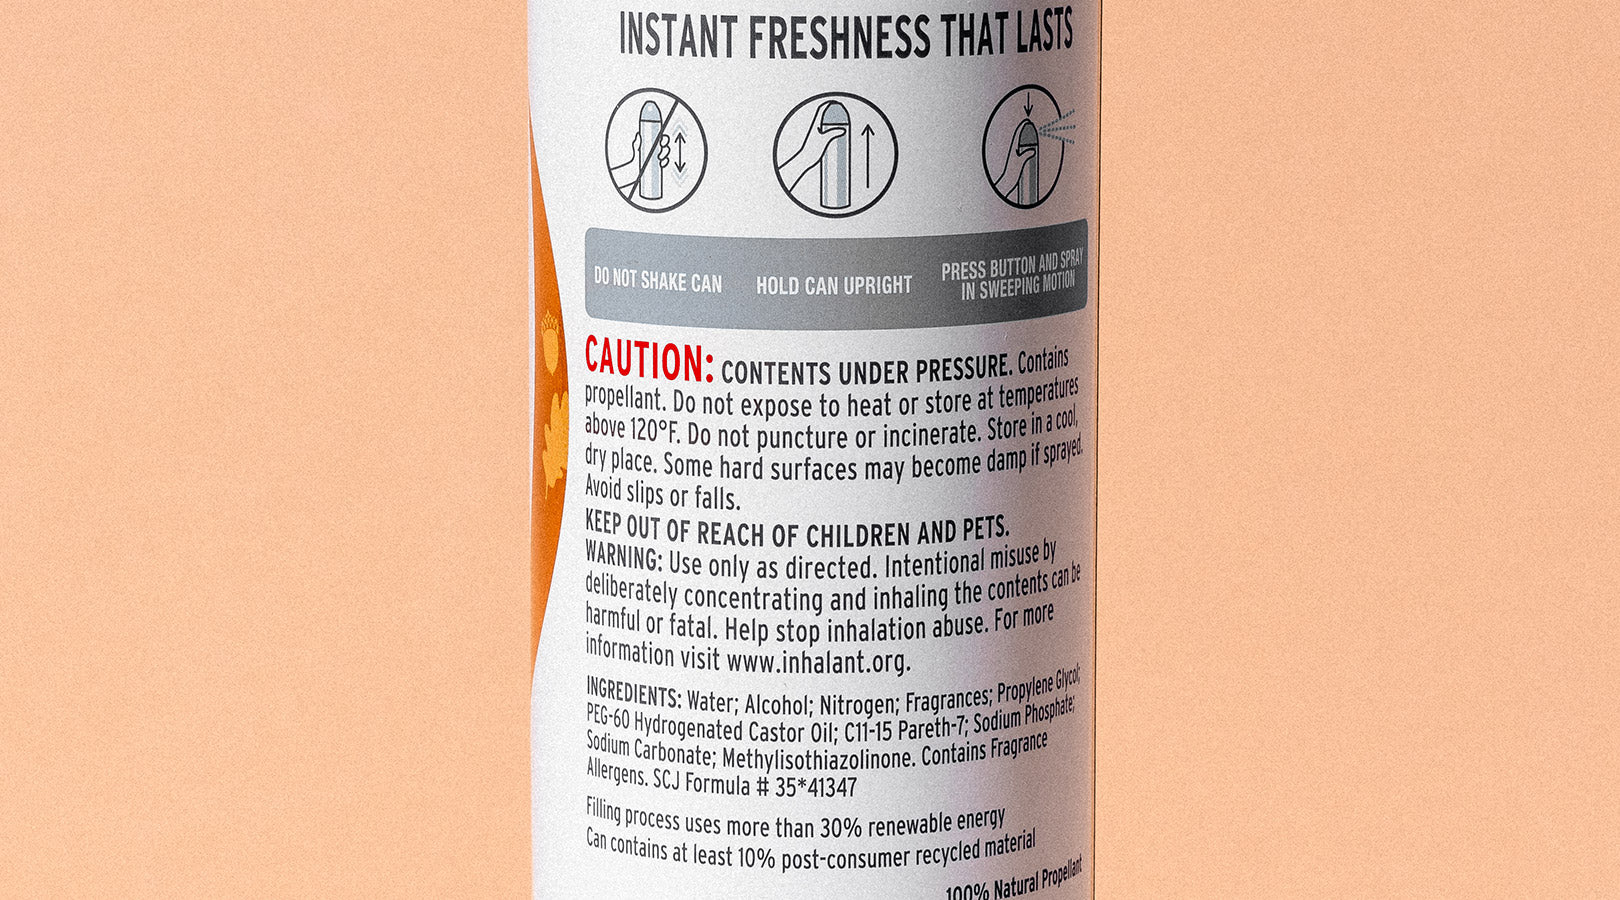 Photo of the warning found on a back of aerosol air freshener. Brings to question the safety of using aerosol air fresheners in a living environment.